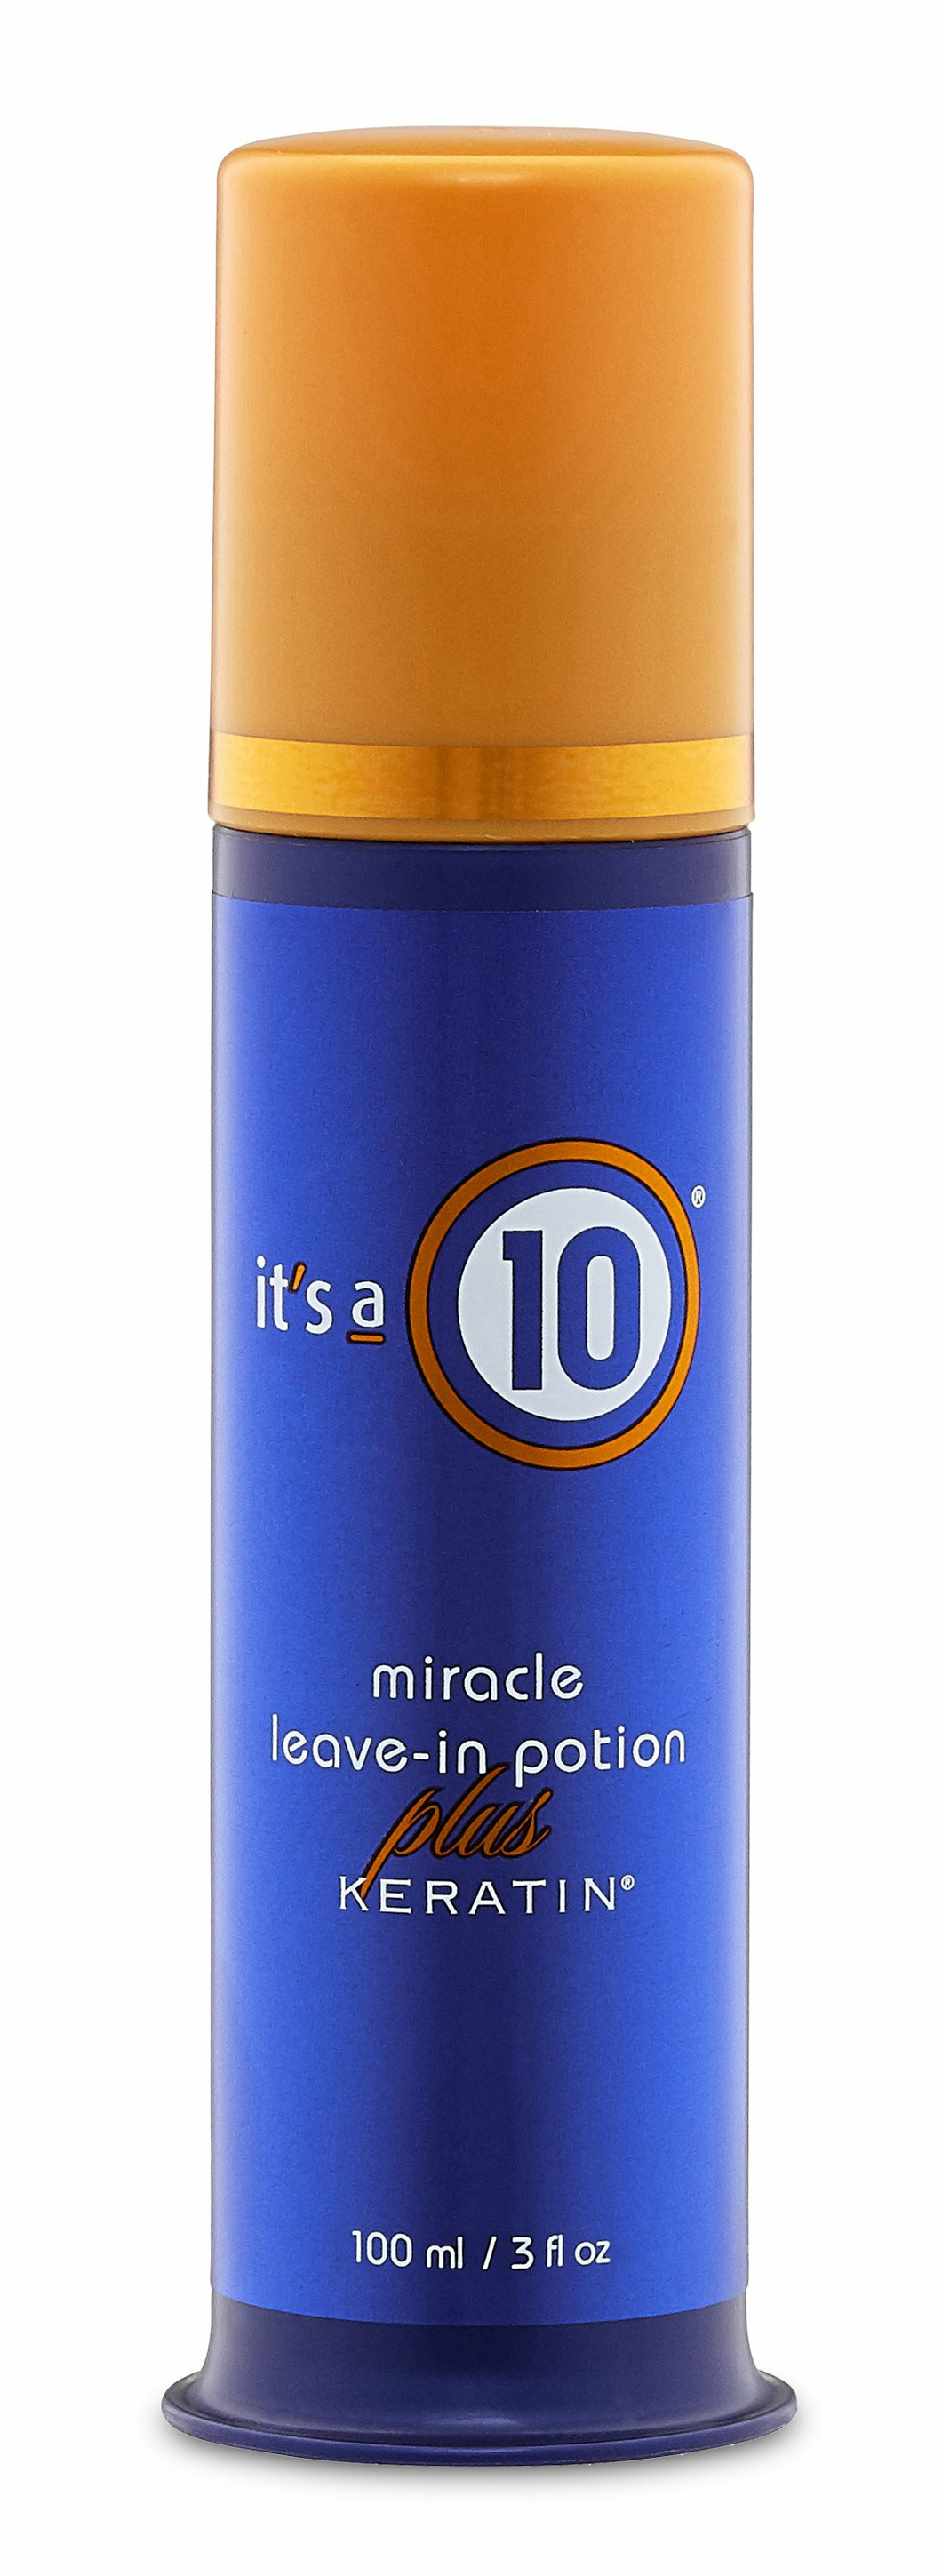 Potion Miracle Styling Potion - It's A 10